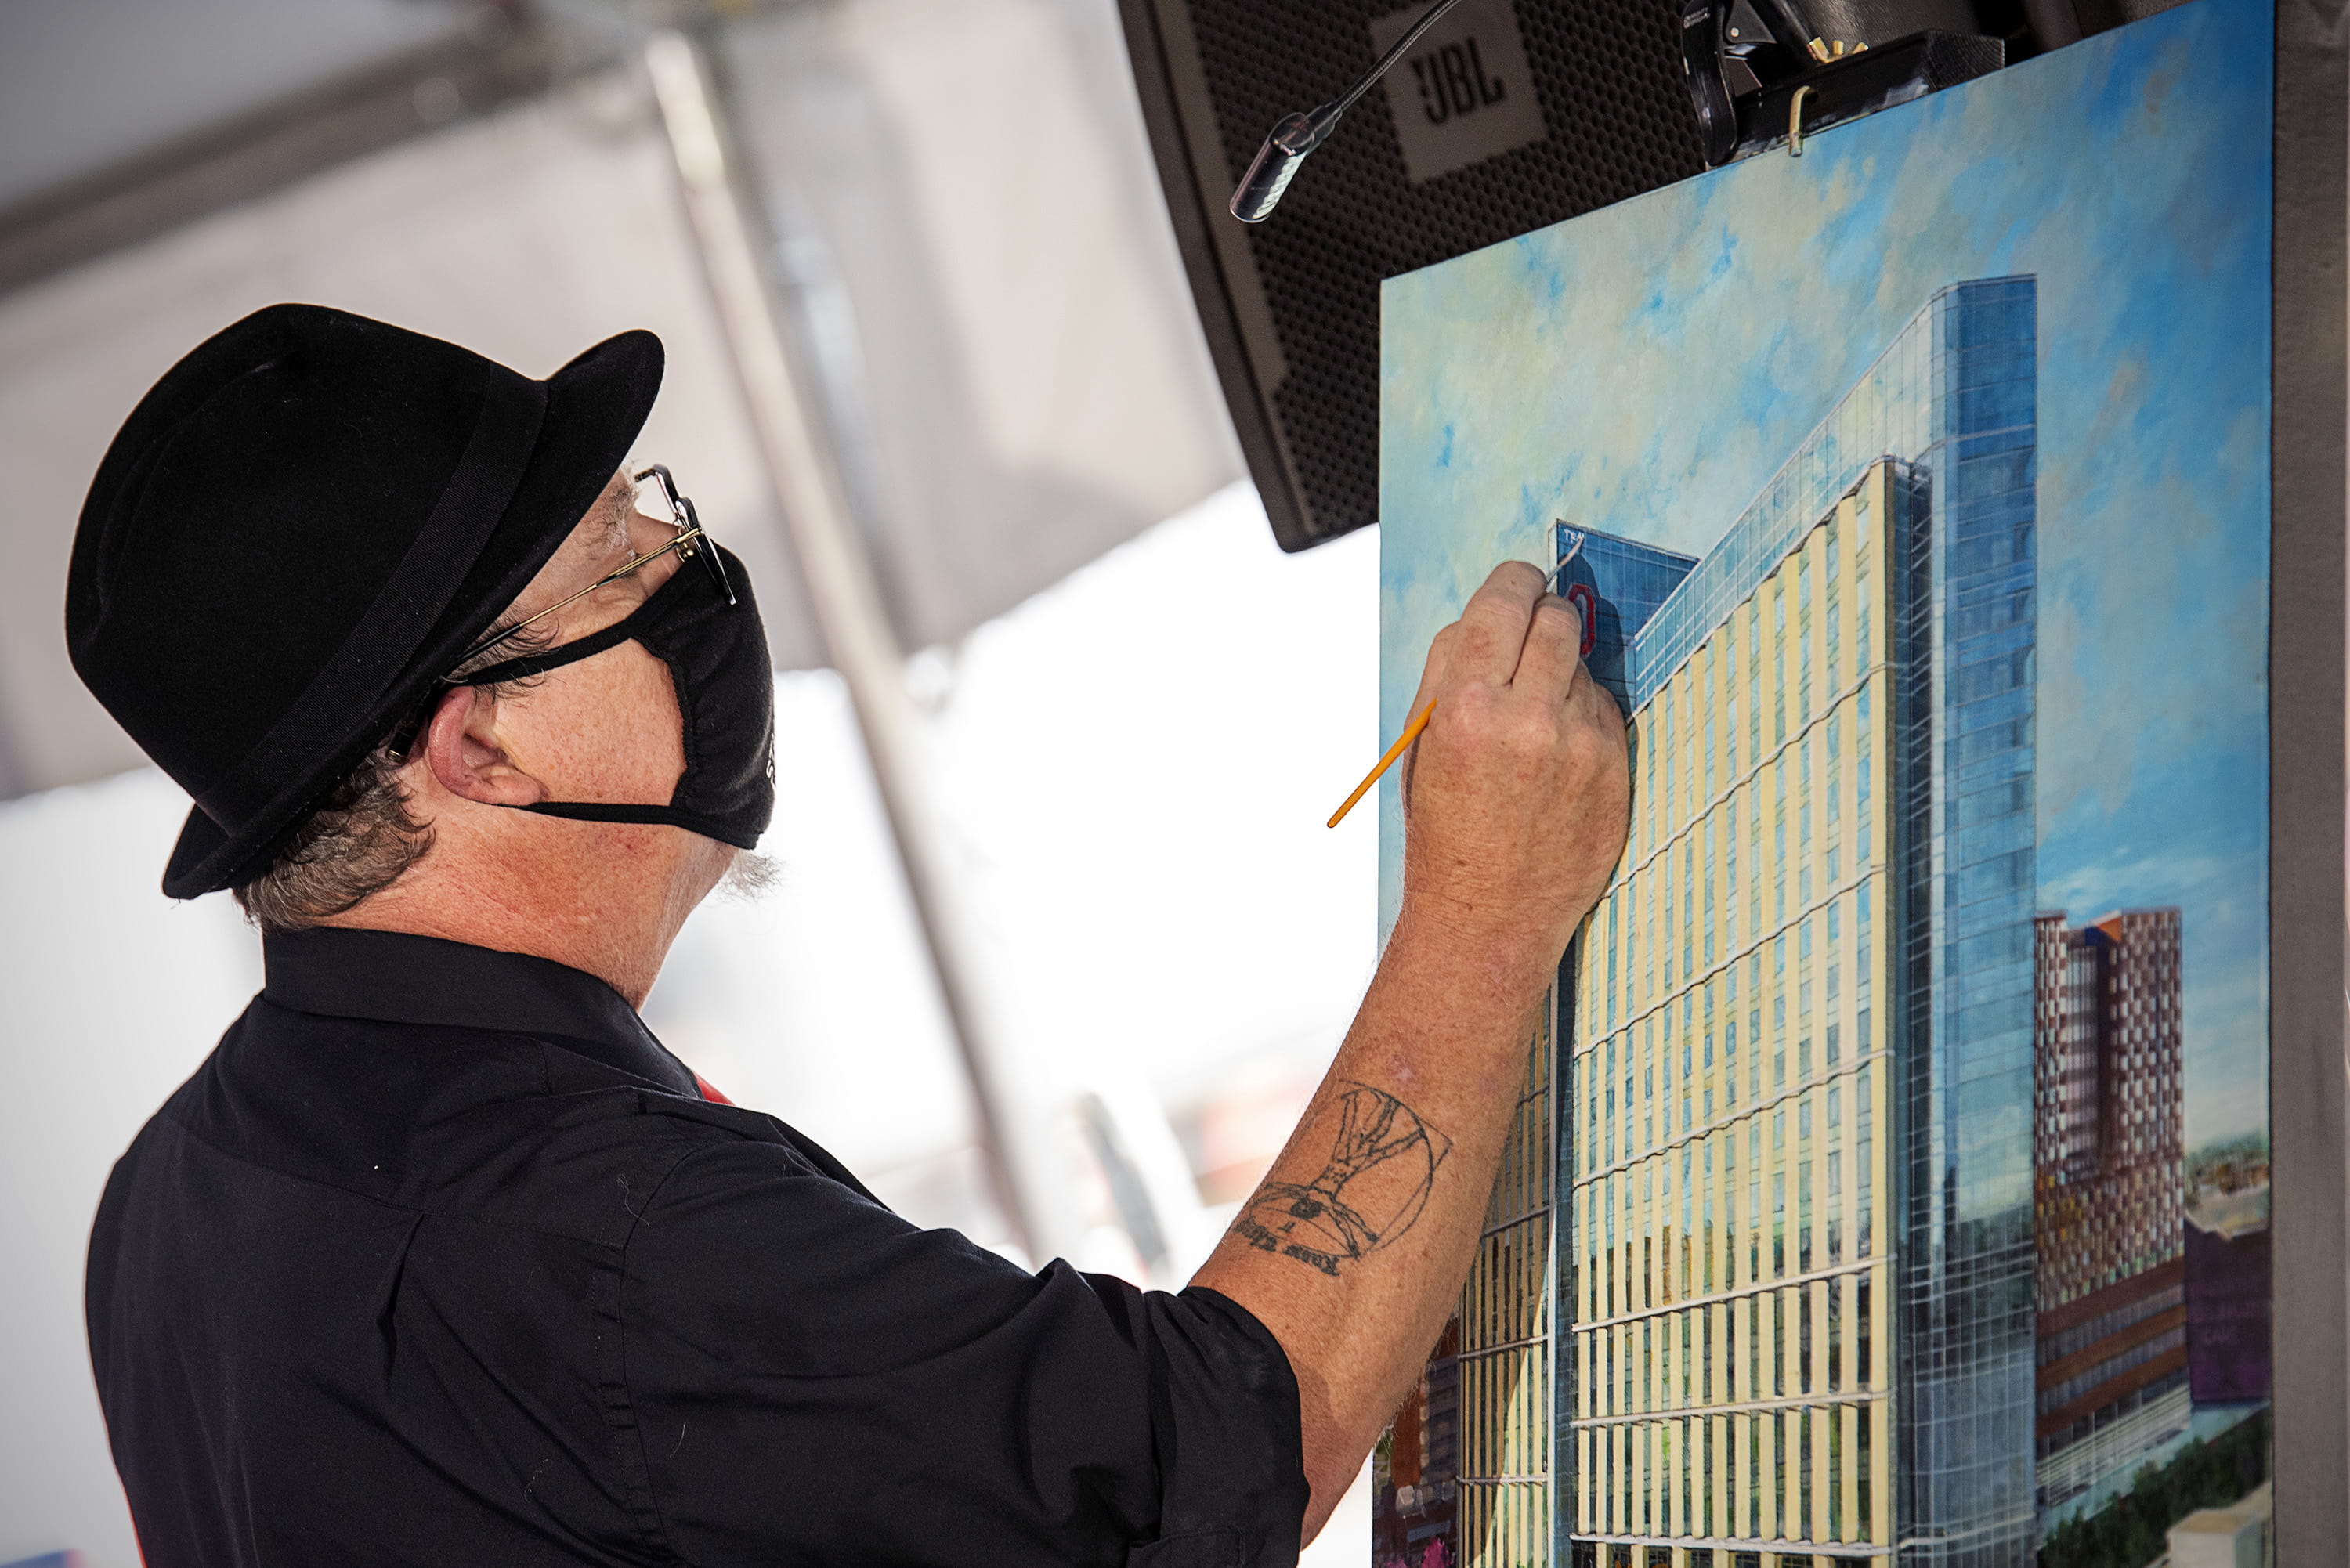 Artist Keith Keith Alan Hasenbalg paints new inpatient hospital during celebration event.